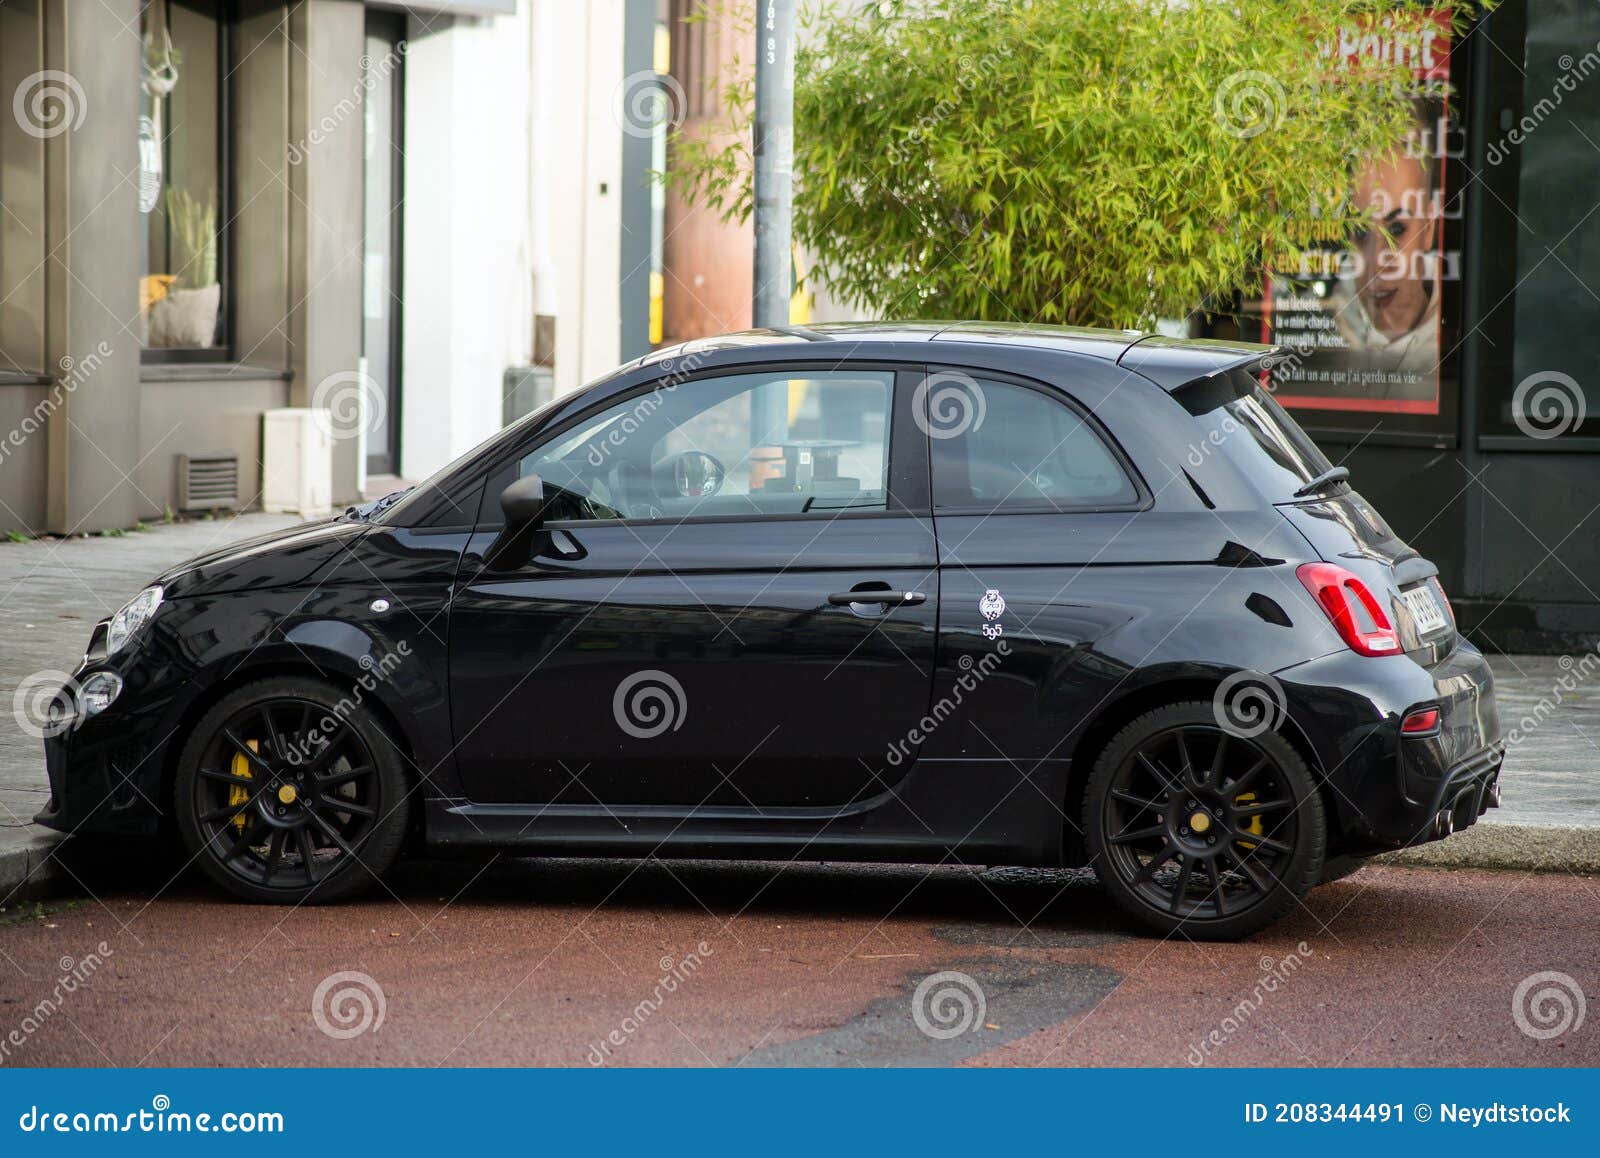 Profile View of Black Fiat 500 Abarth Parked in the Street Editorial Photo - Image of mini: 208344491